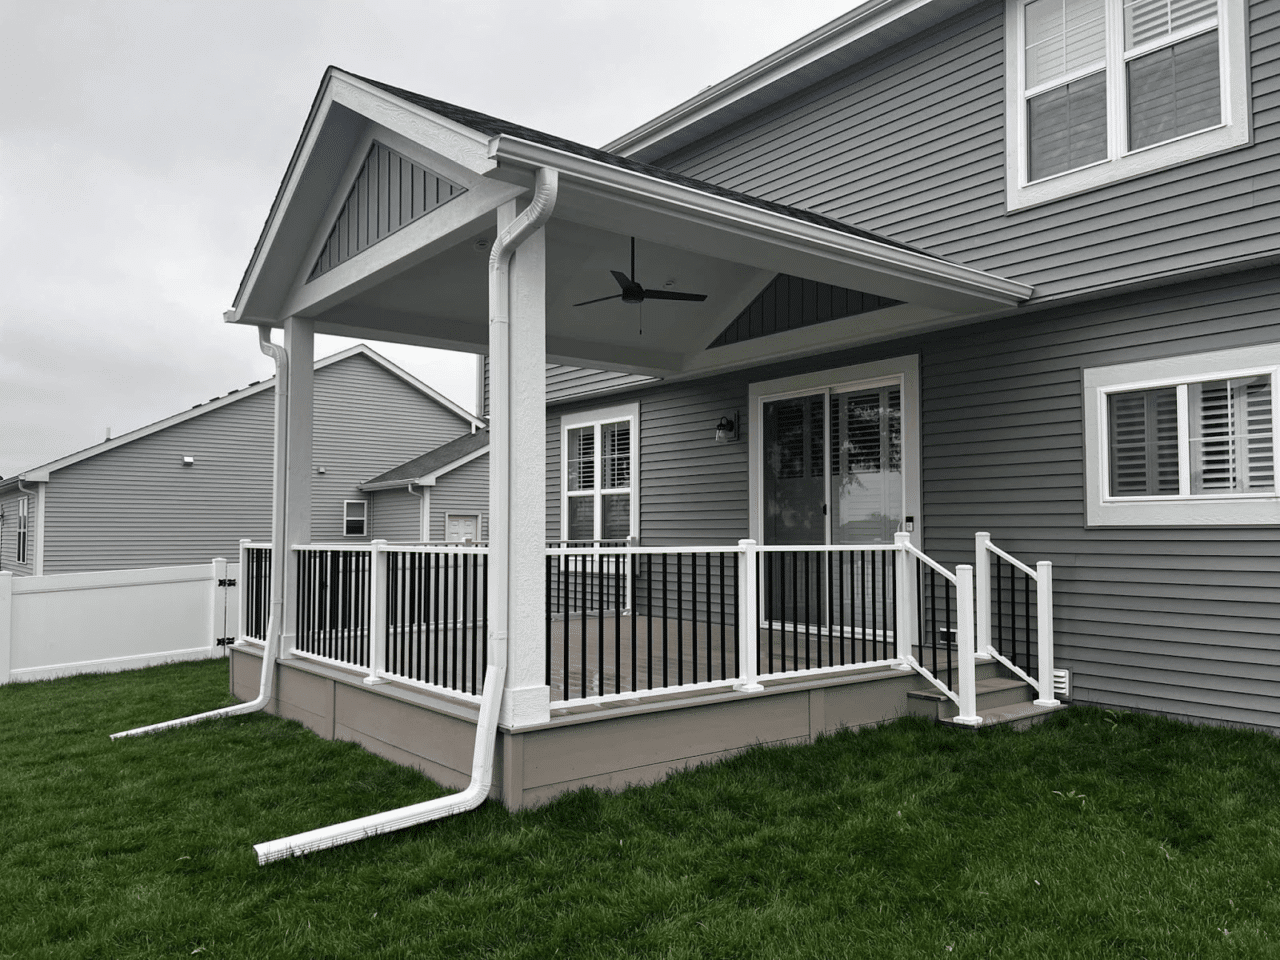 Covered Porch Options